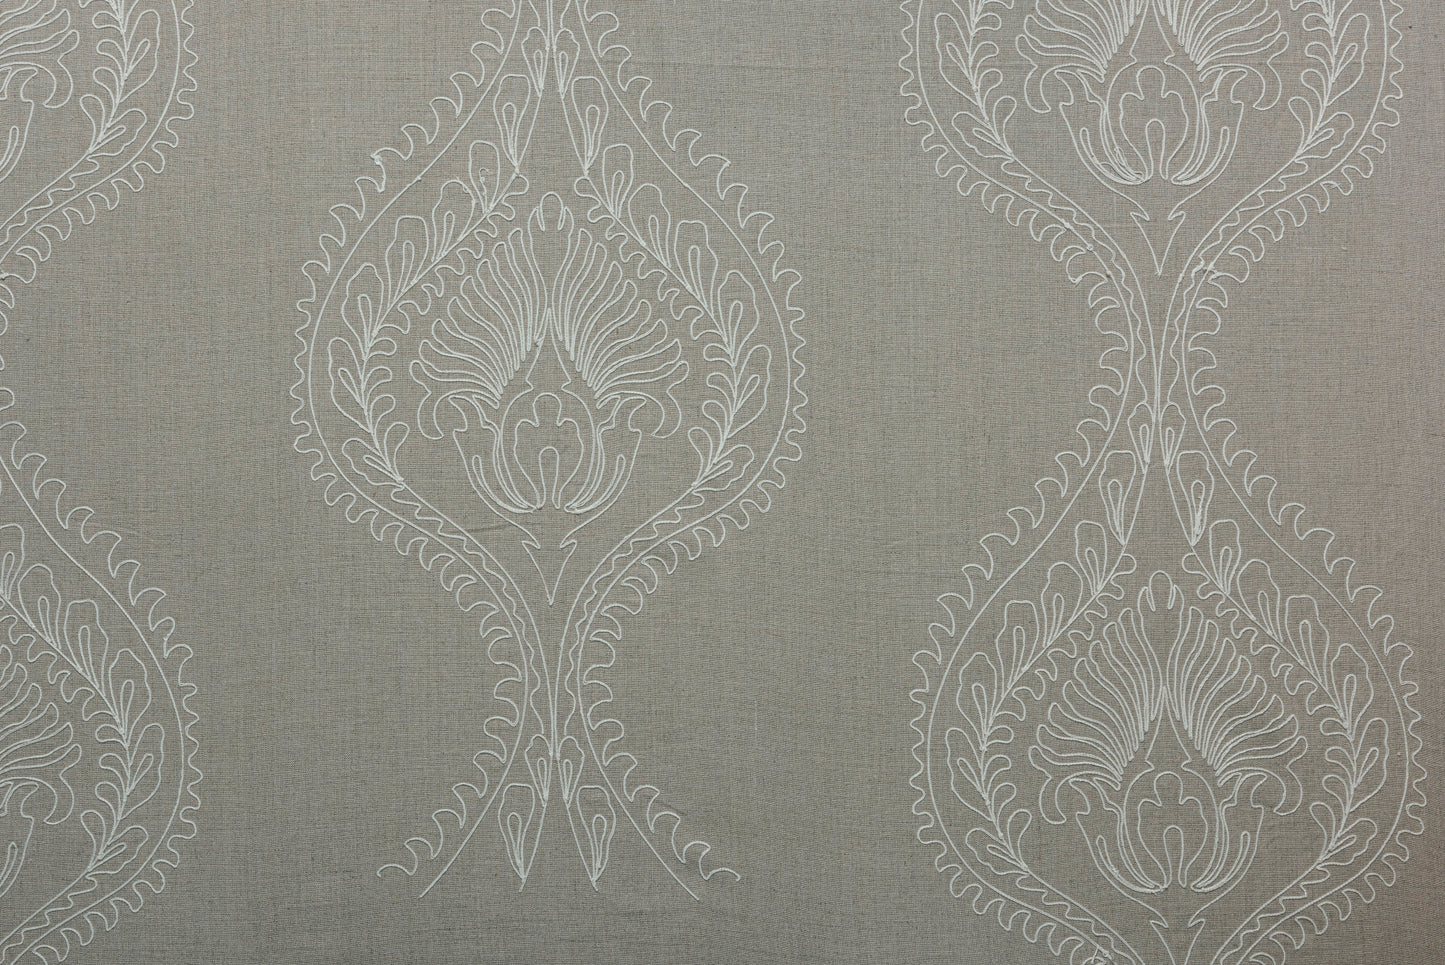 Load image into Gallery viewer, Ottoman Dori Embroidery on 100% Linen Fabric
